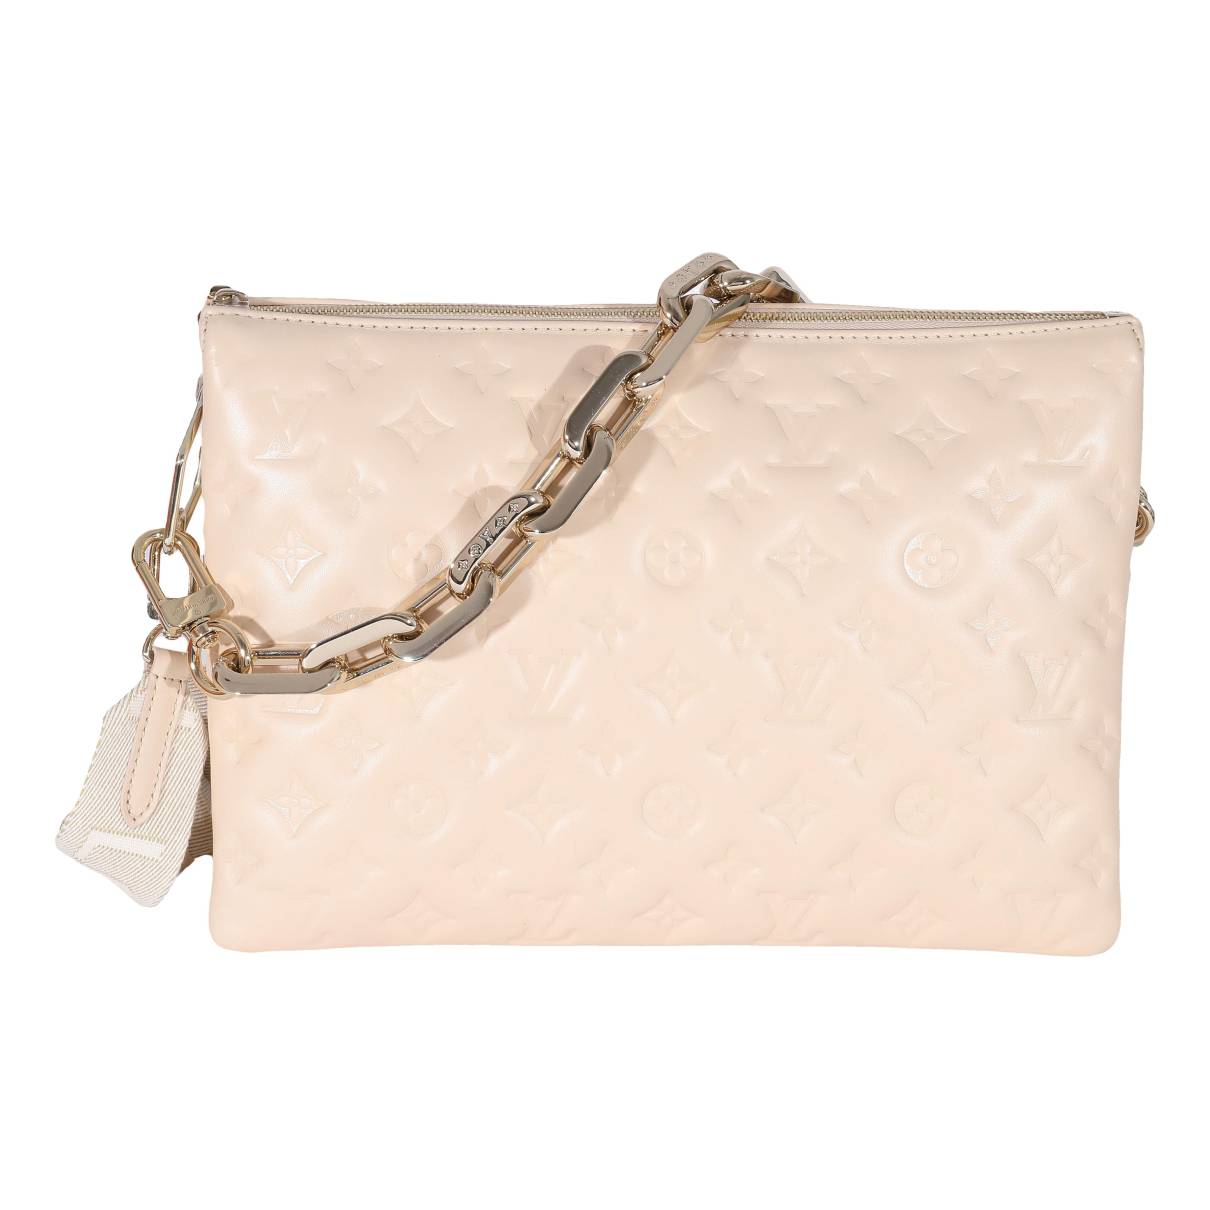 Louis+Vuitton+Coussin+Crossbody+PM+Cream+Leather for sale online